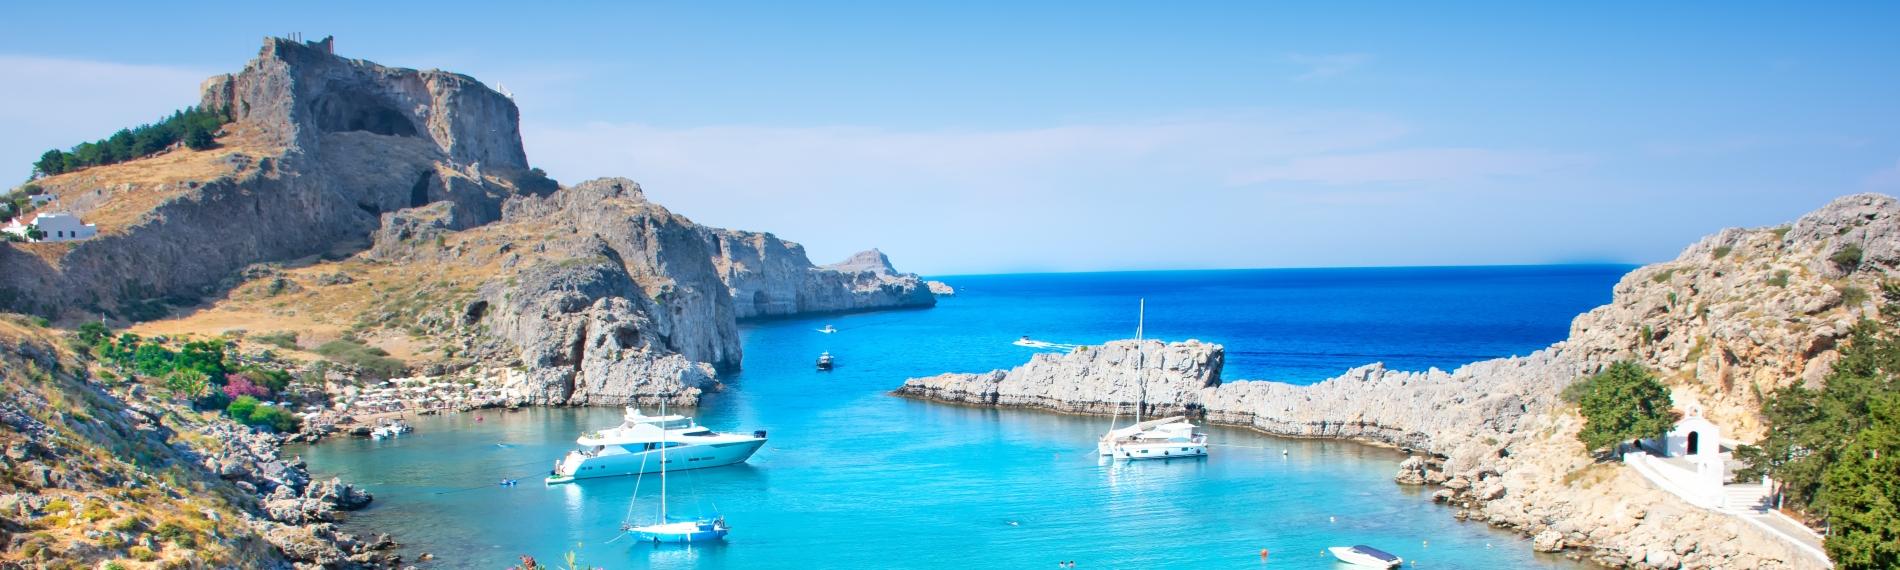 St Paul's Bay in Lindos on the Greek island of Rhodes